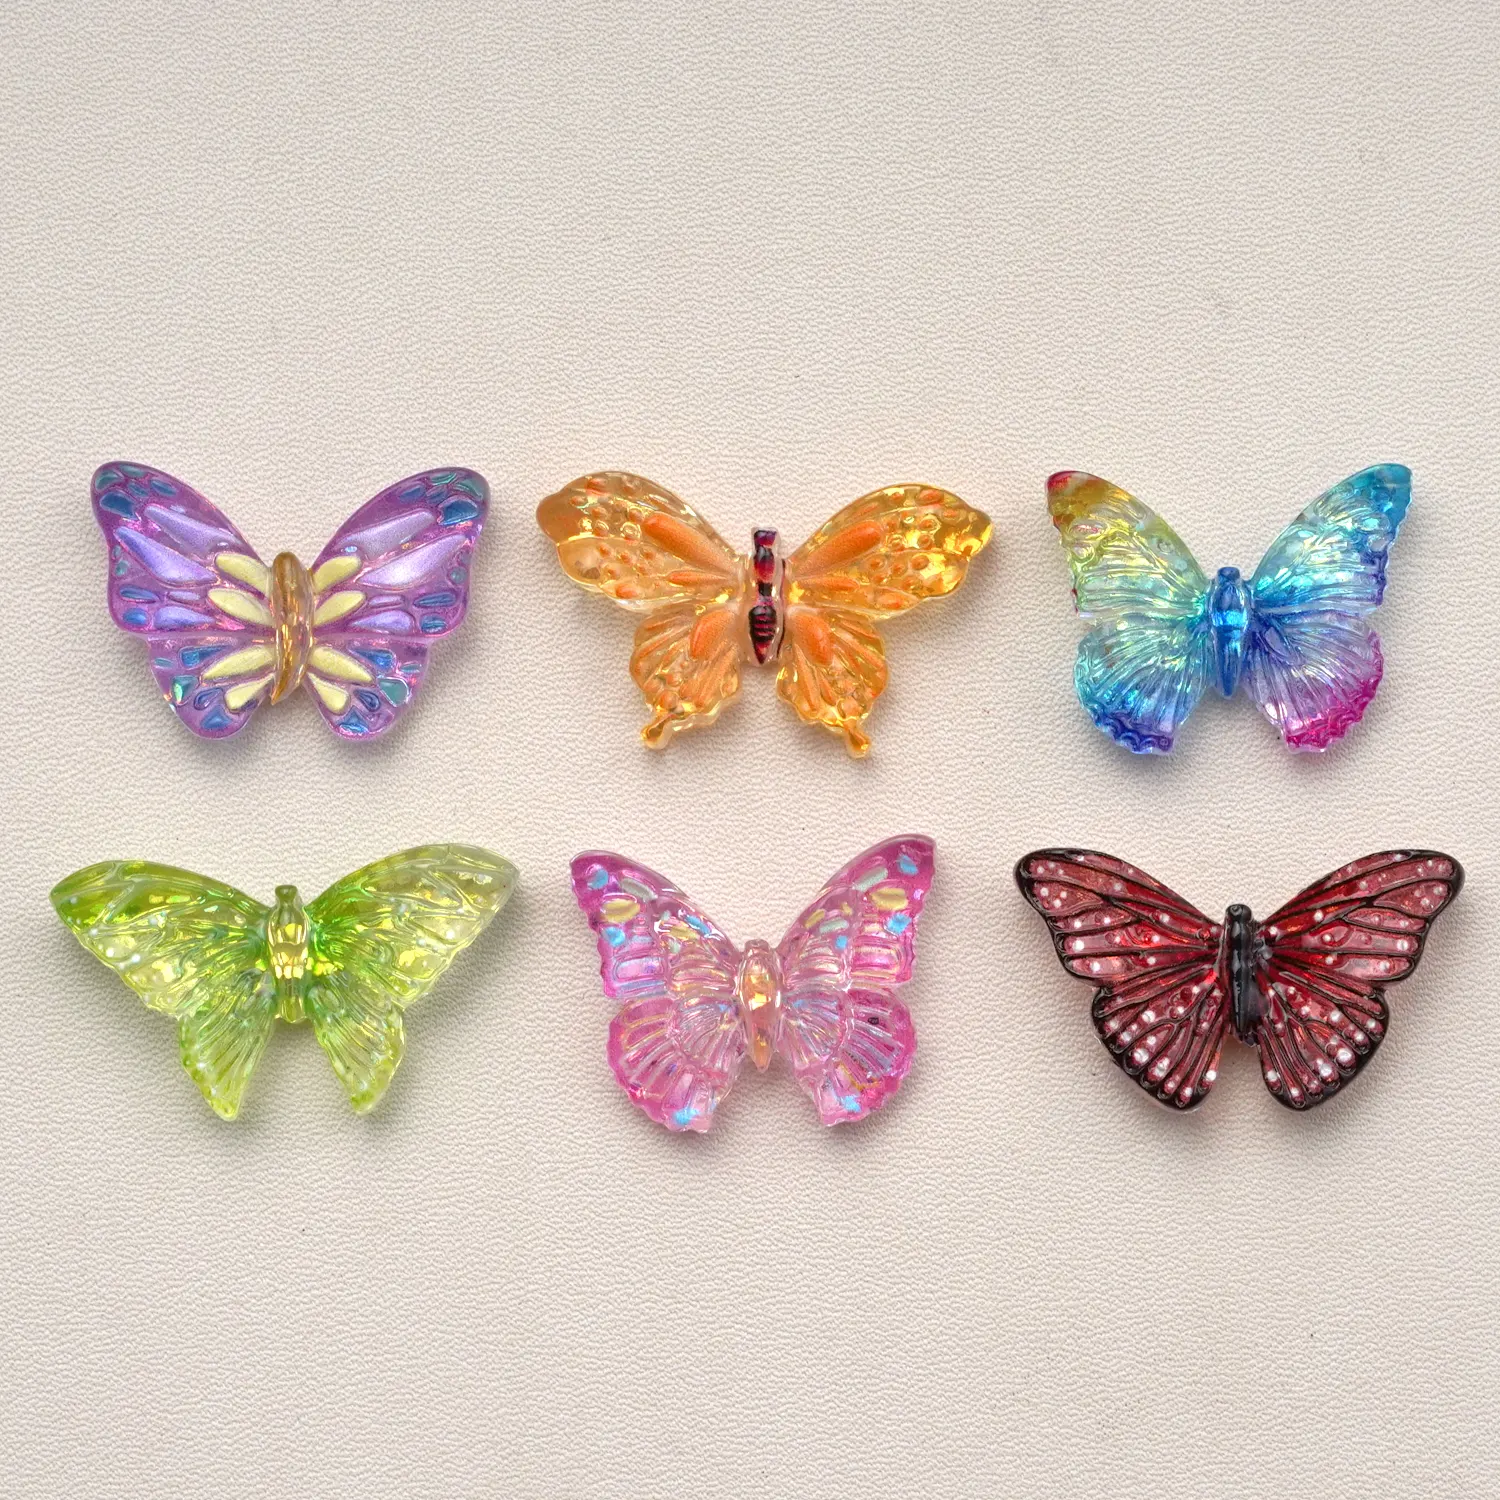 Wholesale colorful bright butterfly flatback resin cabochons for cell phone chain pendant hairpin making charms accessories